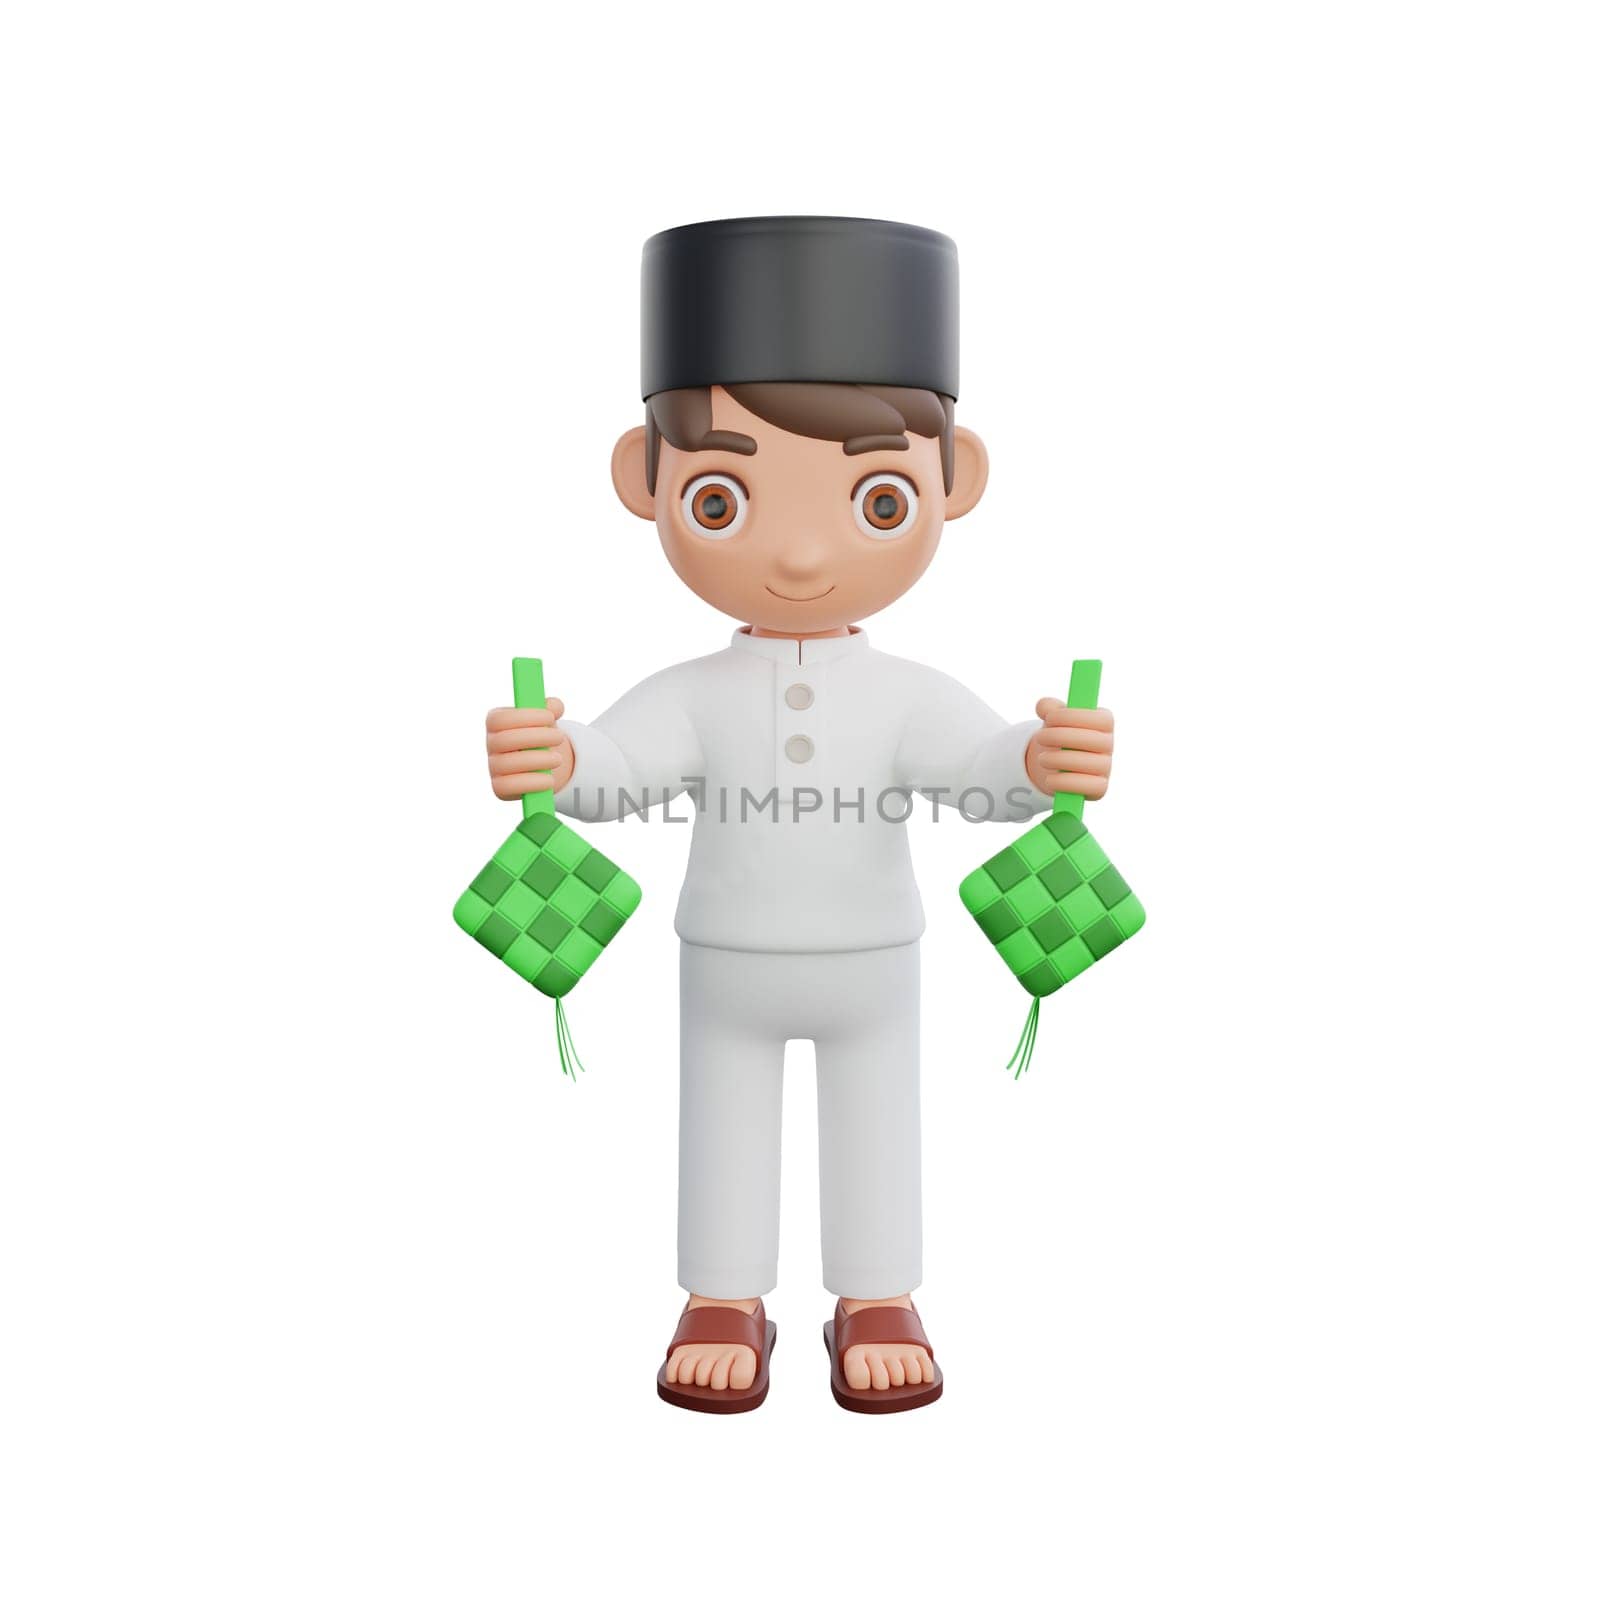 3D Illustration of Muslim character holding ketupat in both hands, perfect for Ramadan kareem themed projects